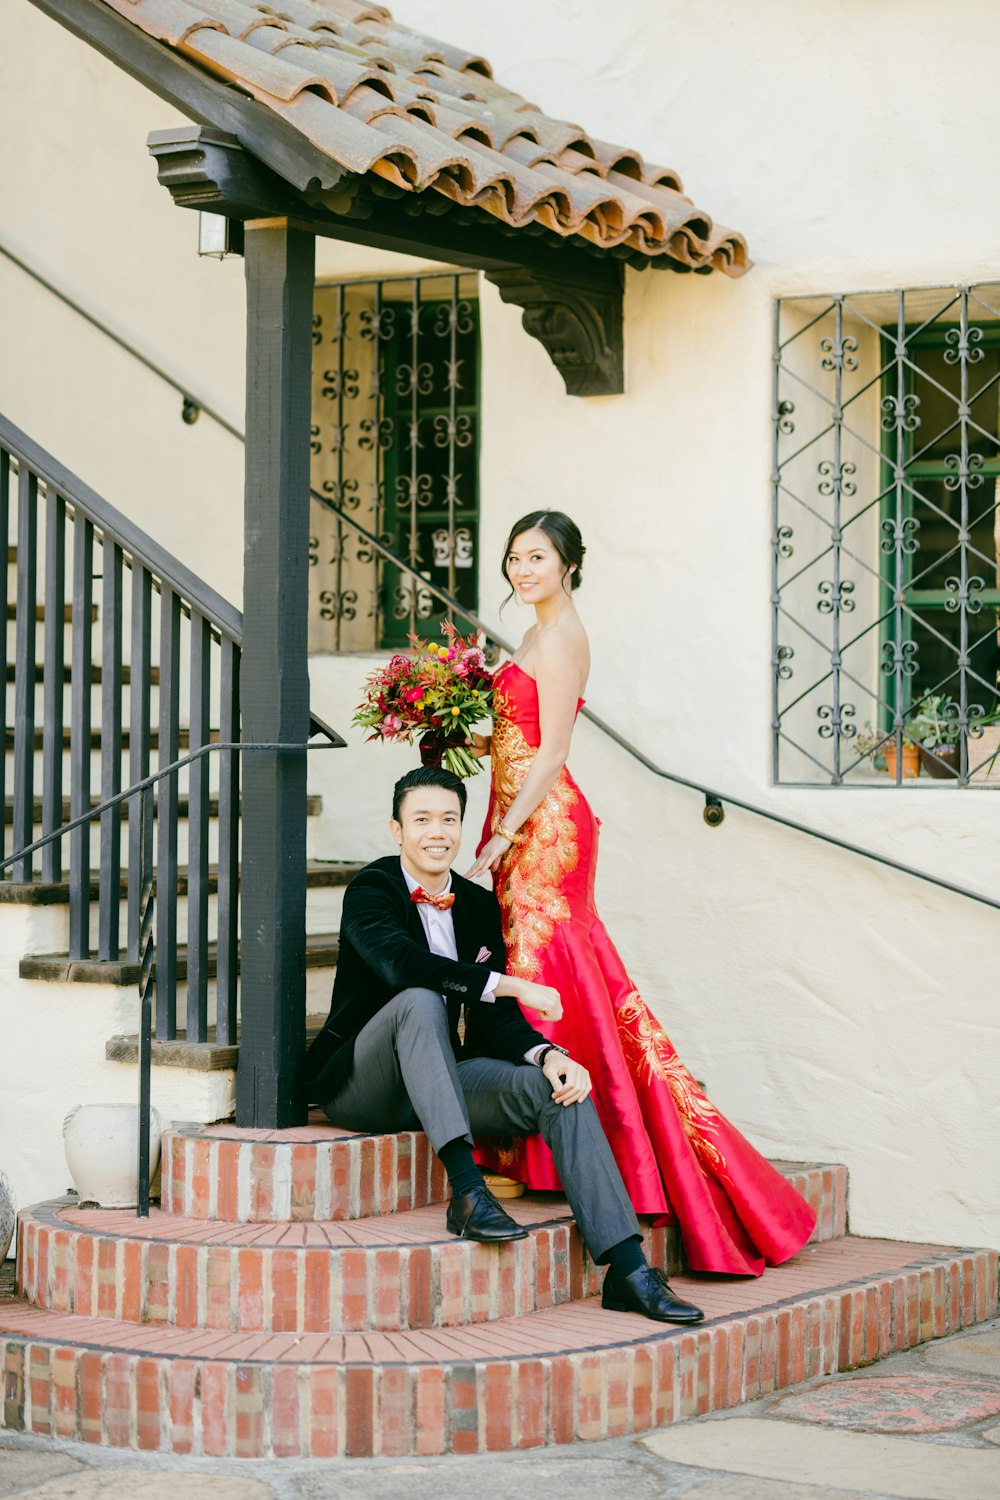 man in black suit jacket and woman in red dress